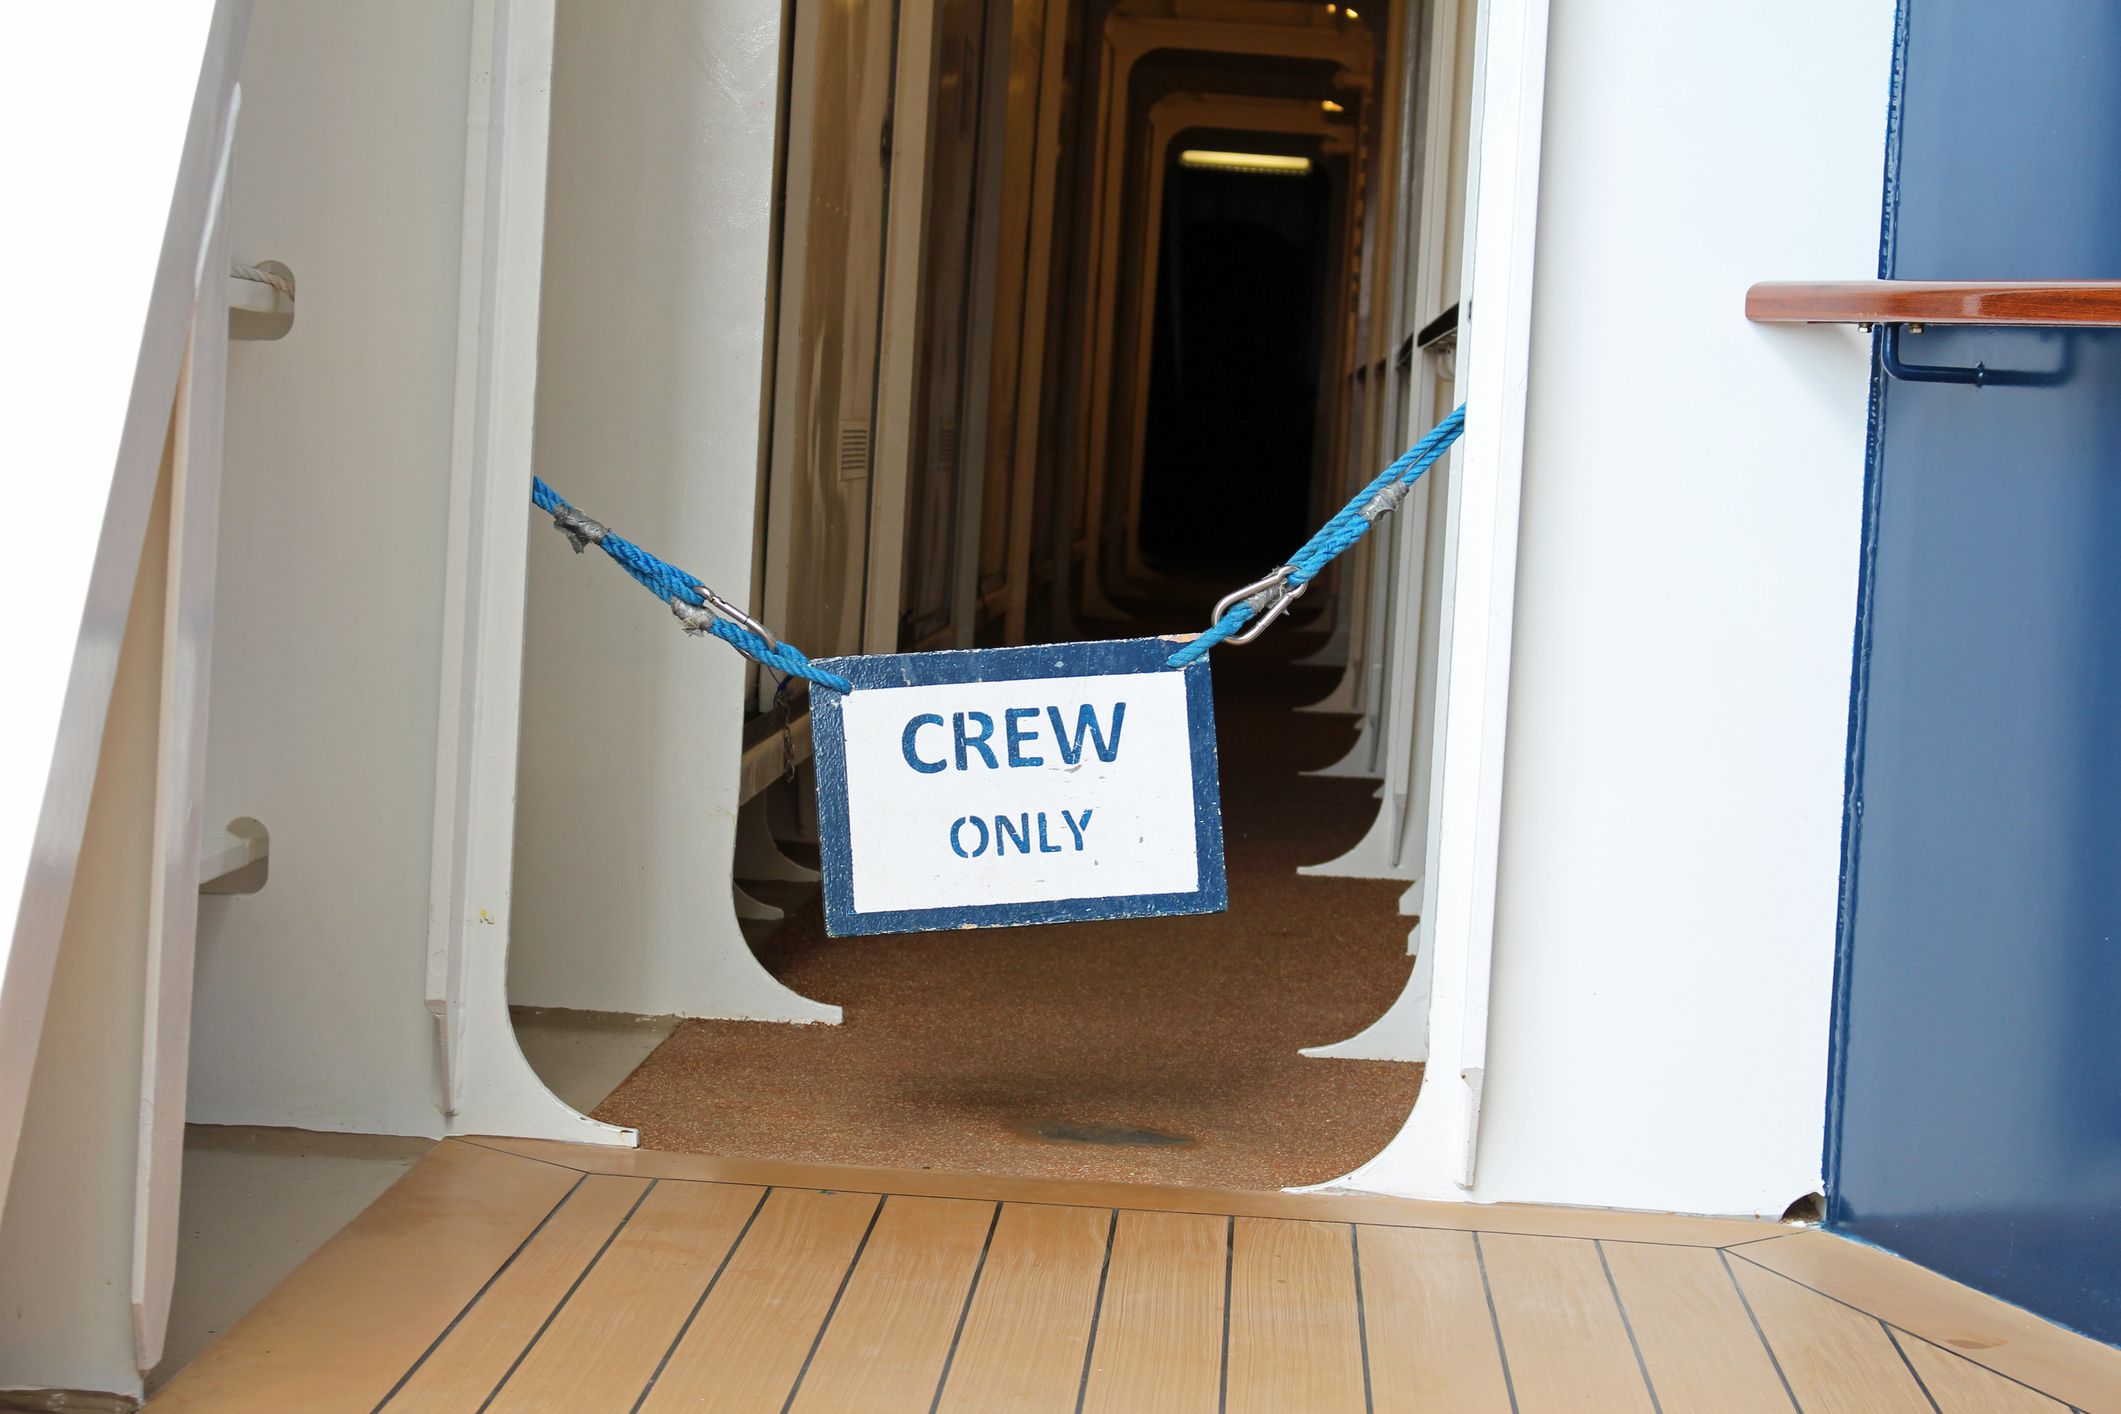 <p>Every cruise line has strict and explicit guidelines on interactions between crew and passengers. <a href="https://www.royalcaribbean.com/guest-terms/guest-health-safety-and-conduct-policy/english/">Royal Caribbean</a> even goes so far as to say: “Please do not misinterpret their friendliness. Crew members are prohibited from engaging in physical relationships with guests.” Staff are not permitted in staterooms except to perform their shipboard duties, and similarly, passengers are not allowed to enter restricted or crew areas of the ship.</p>